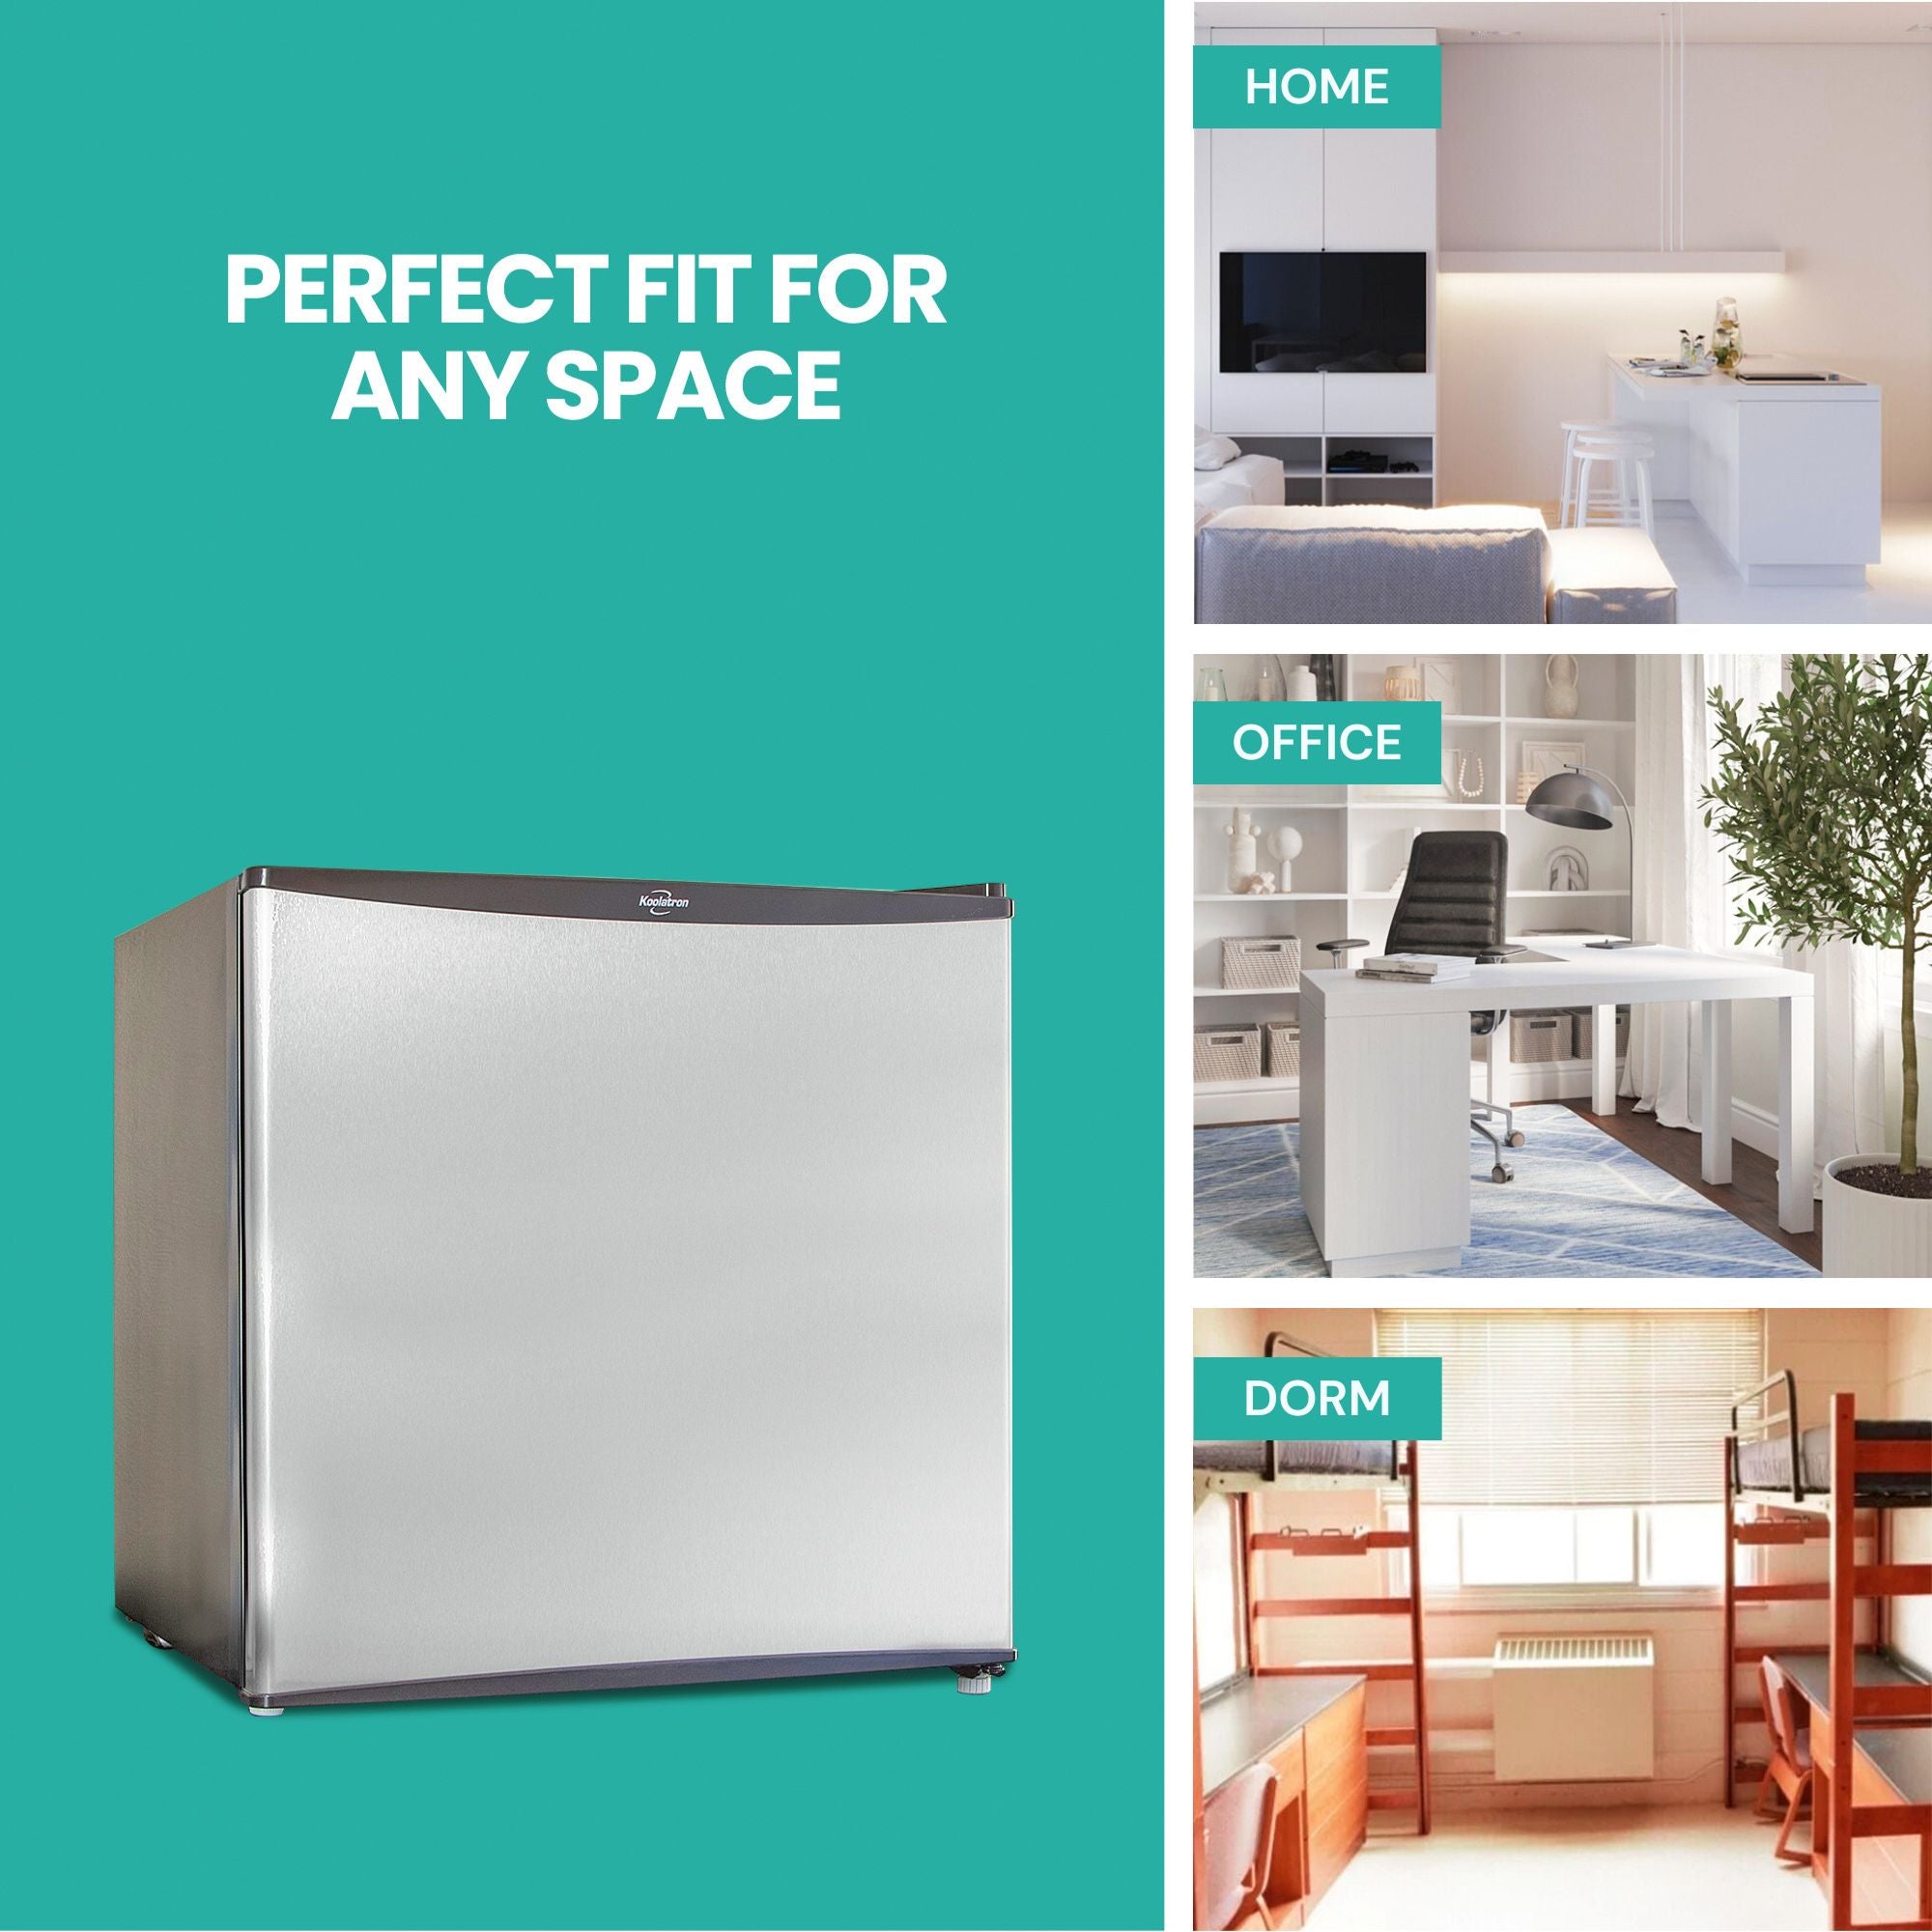 Black and stainless steel compact fridge with freezer, closed, on an aqua background with text above reading, "Perfect fit for any space." Three pictures to the right show settings where the fridge could be used: Home, office, dorm